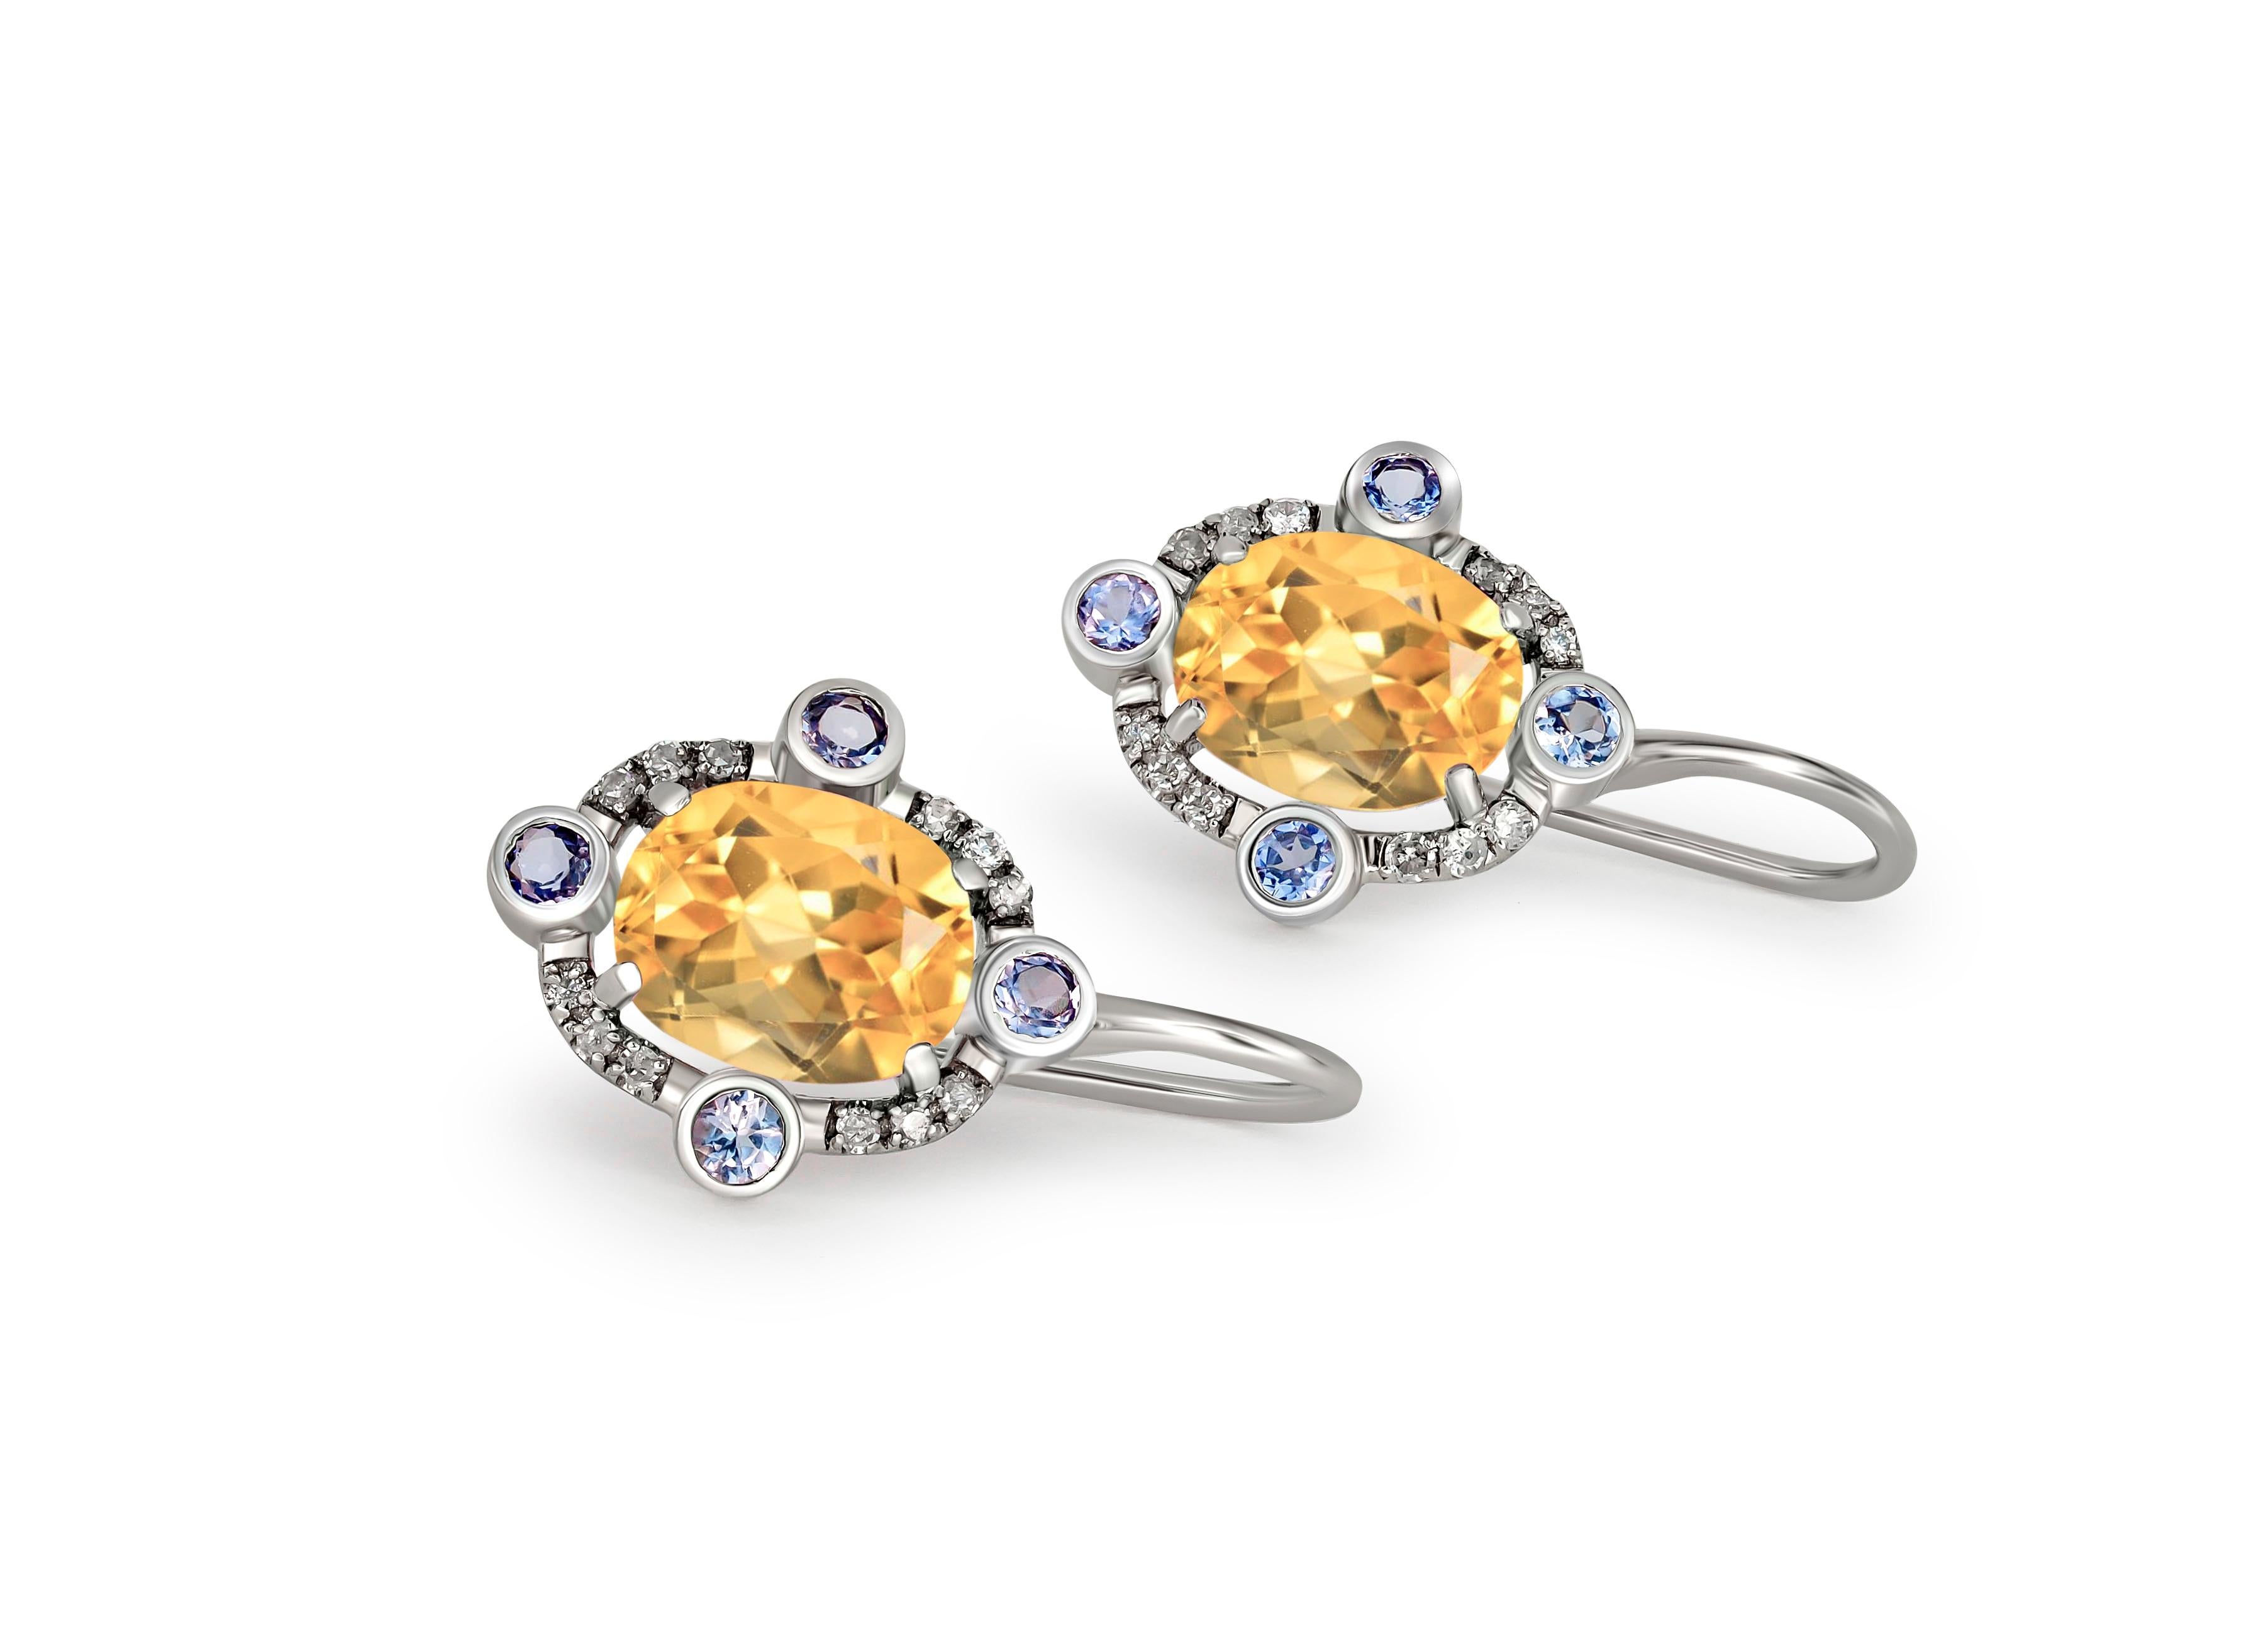 Citrine 14k gold drop earrings.
Oval Citrine 14k gold earrings. 14 kt gold earrings with Citrines, sapphires and diamonds. October birthstone earrings. 

Gold - 14 kt gold 
Size: 20x12 mm 
Weight: 2.50

Central stones: 
Citrine, 2 pieces, oval cut,